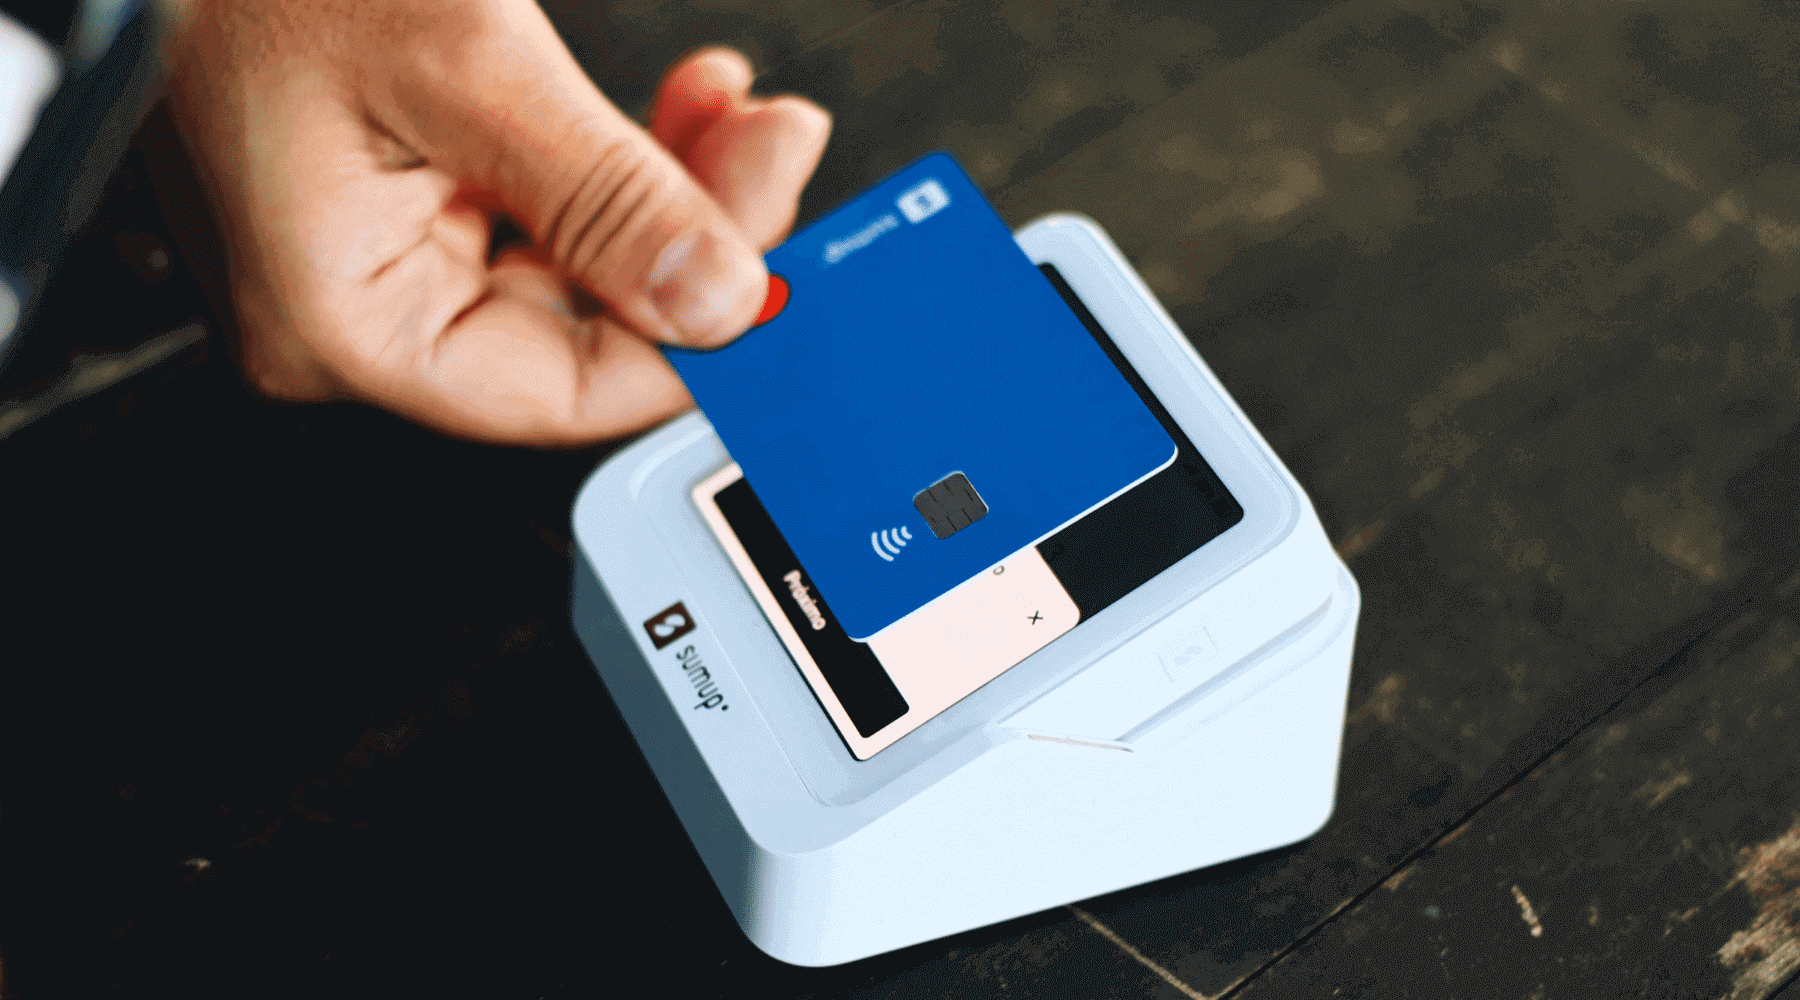 What is RFID card and how does it work?